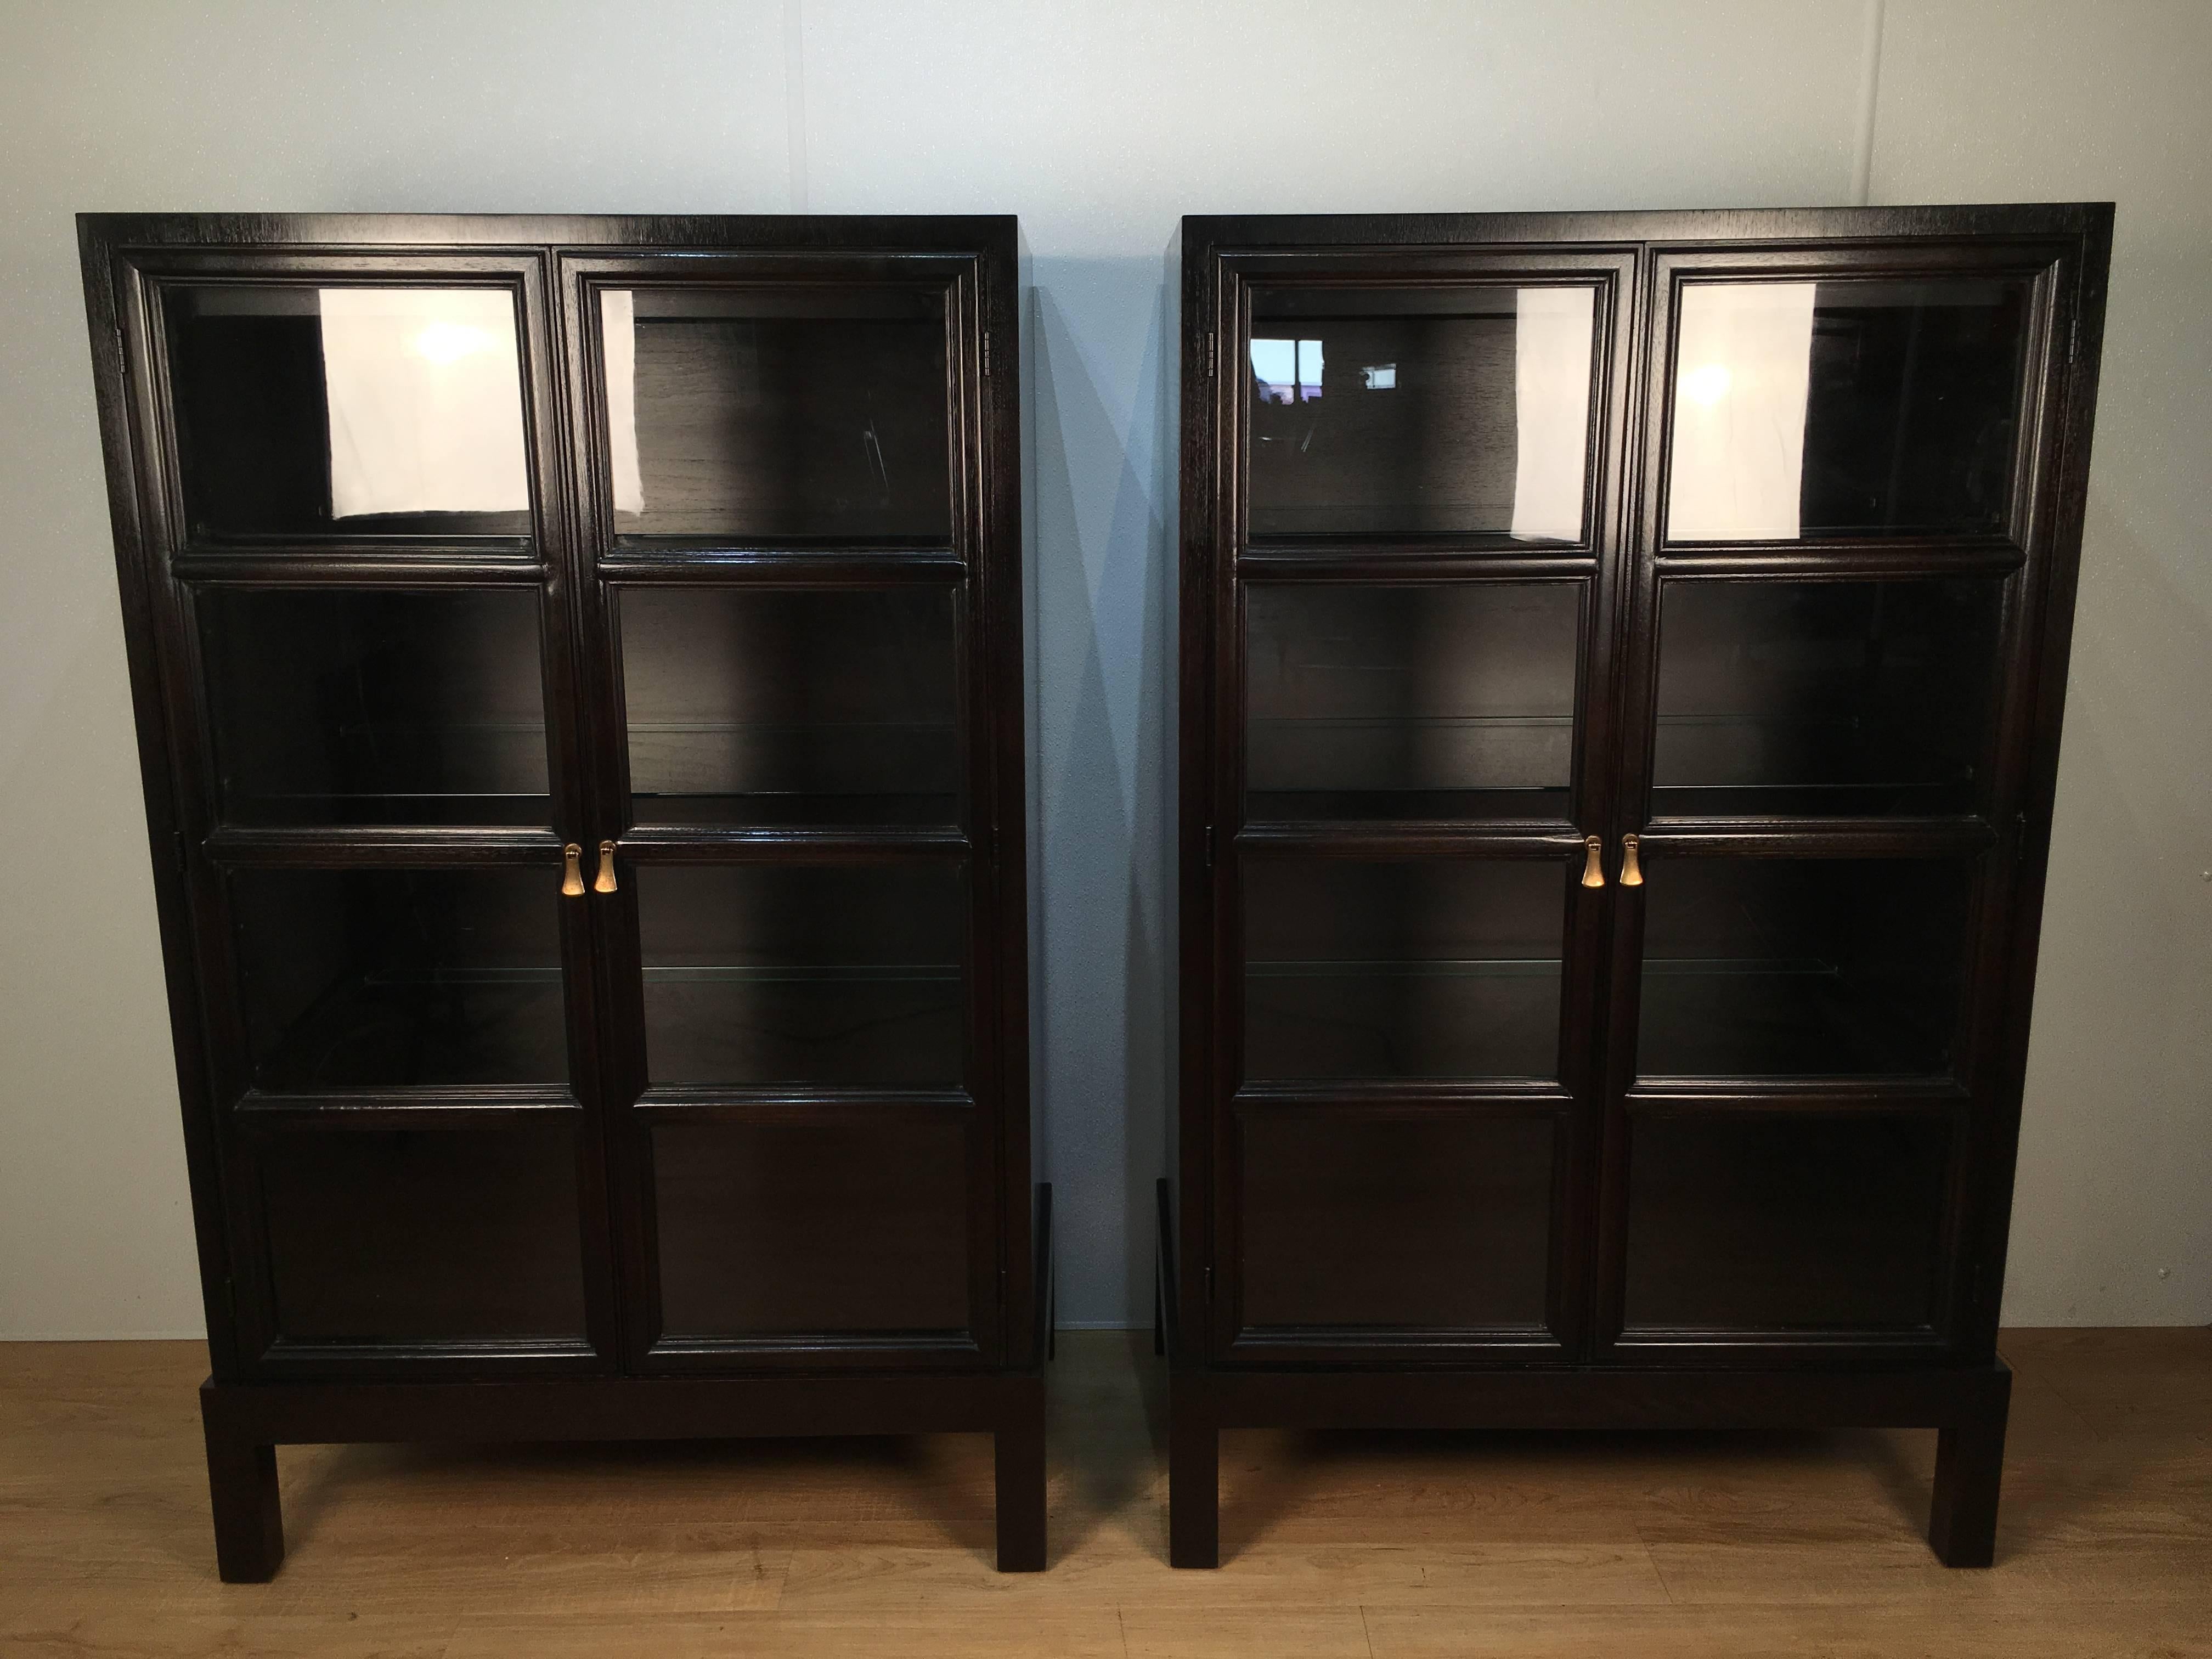 Pair of Widdicomb mahogany glass front  bookcases/ cabinets, each one with twin four panel glass doors, with three adjustable glass shelves and one interior light.
Raised on a conforming straight leg base.